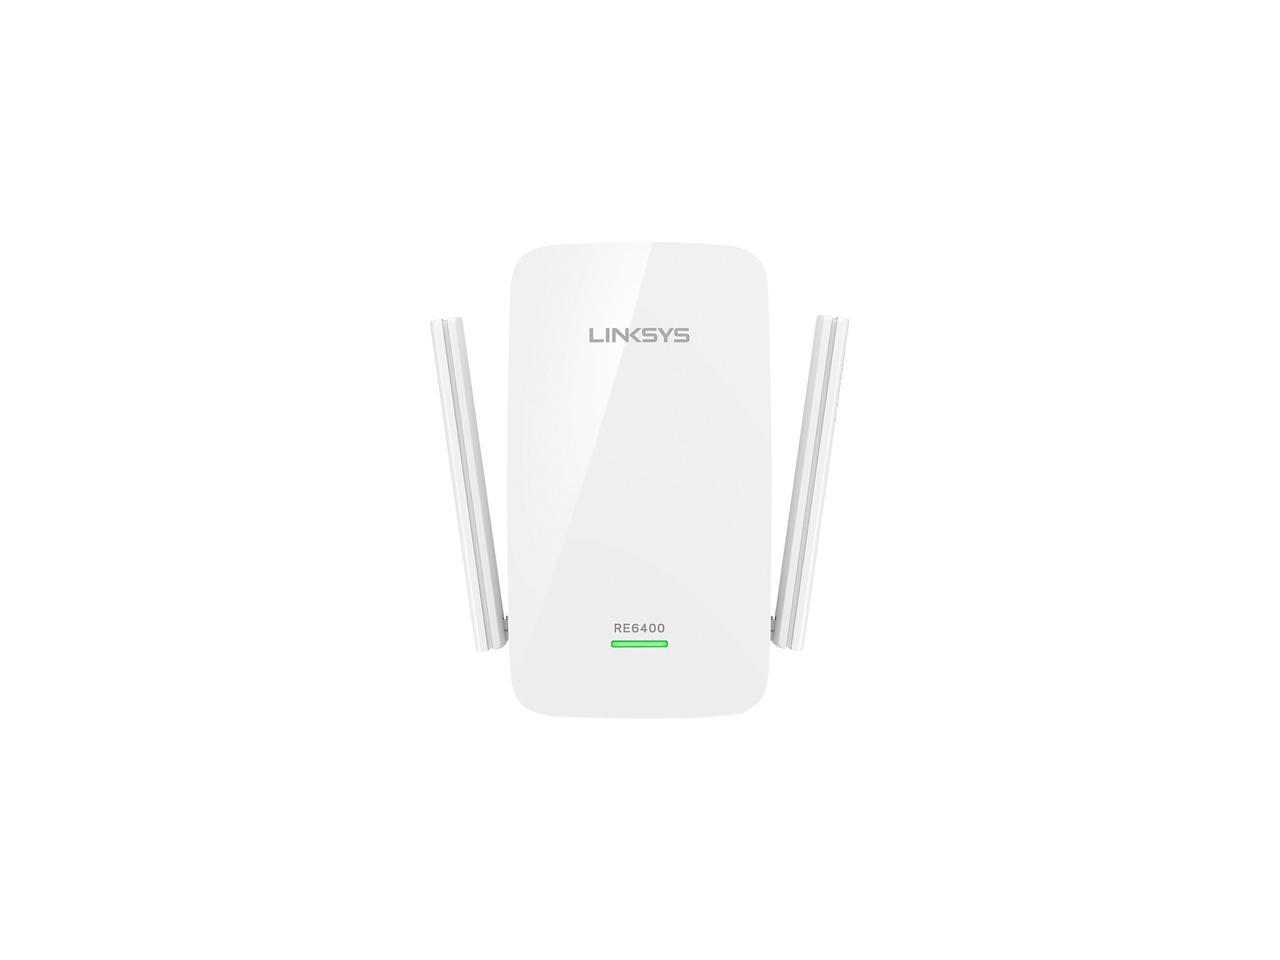 Linksys AC1200 Boost EX Dual-Band Wi-Fi Range Extender RE6400 Certified Refurbished 